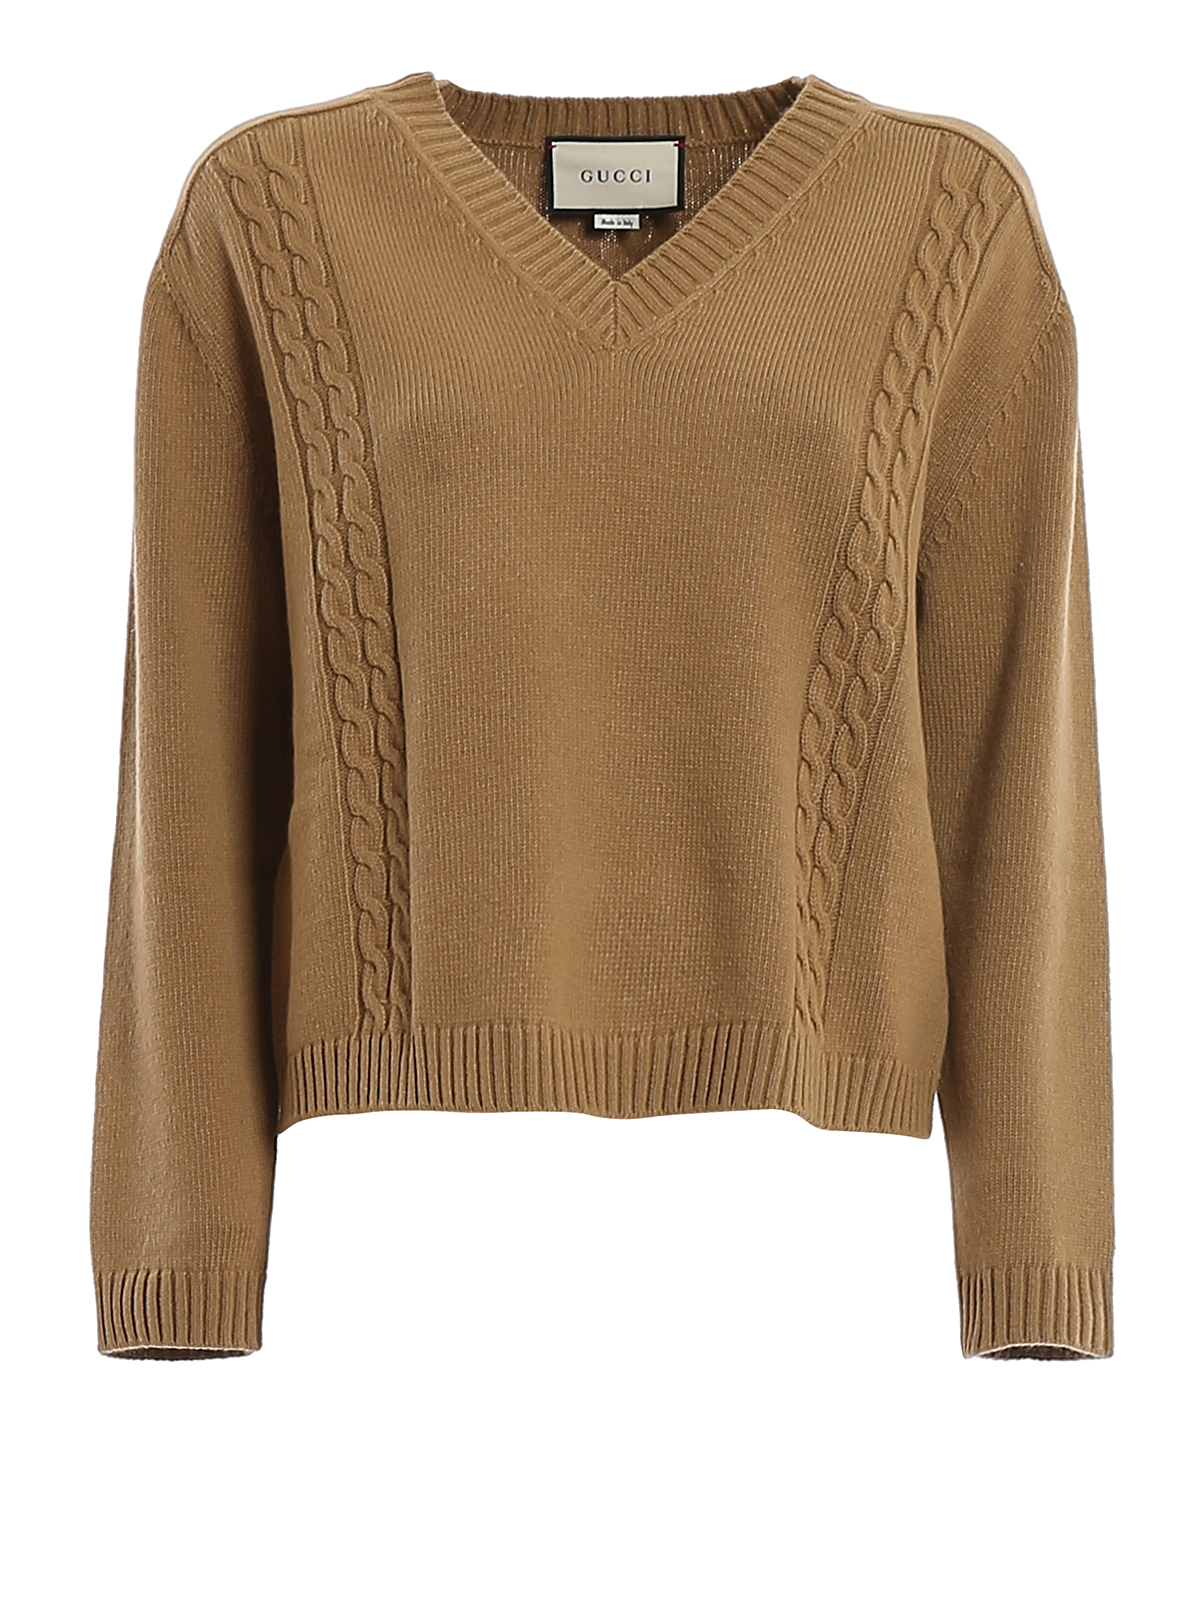 Gucci Gg Embroidery Wool Sweater In Camel